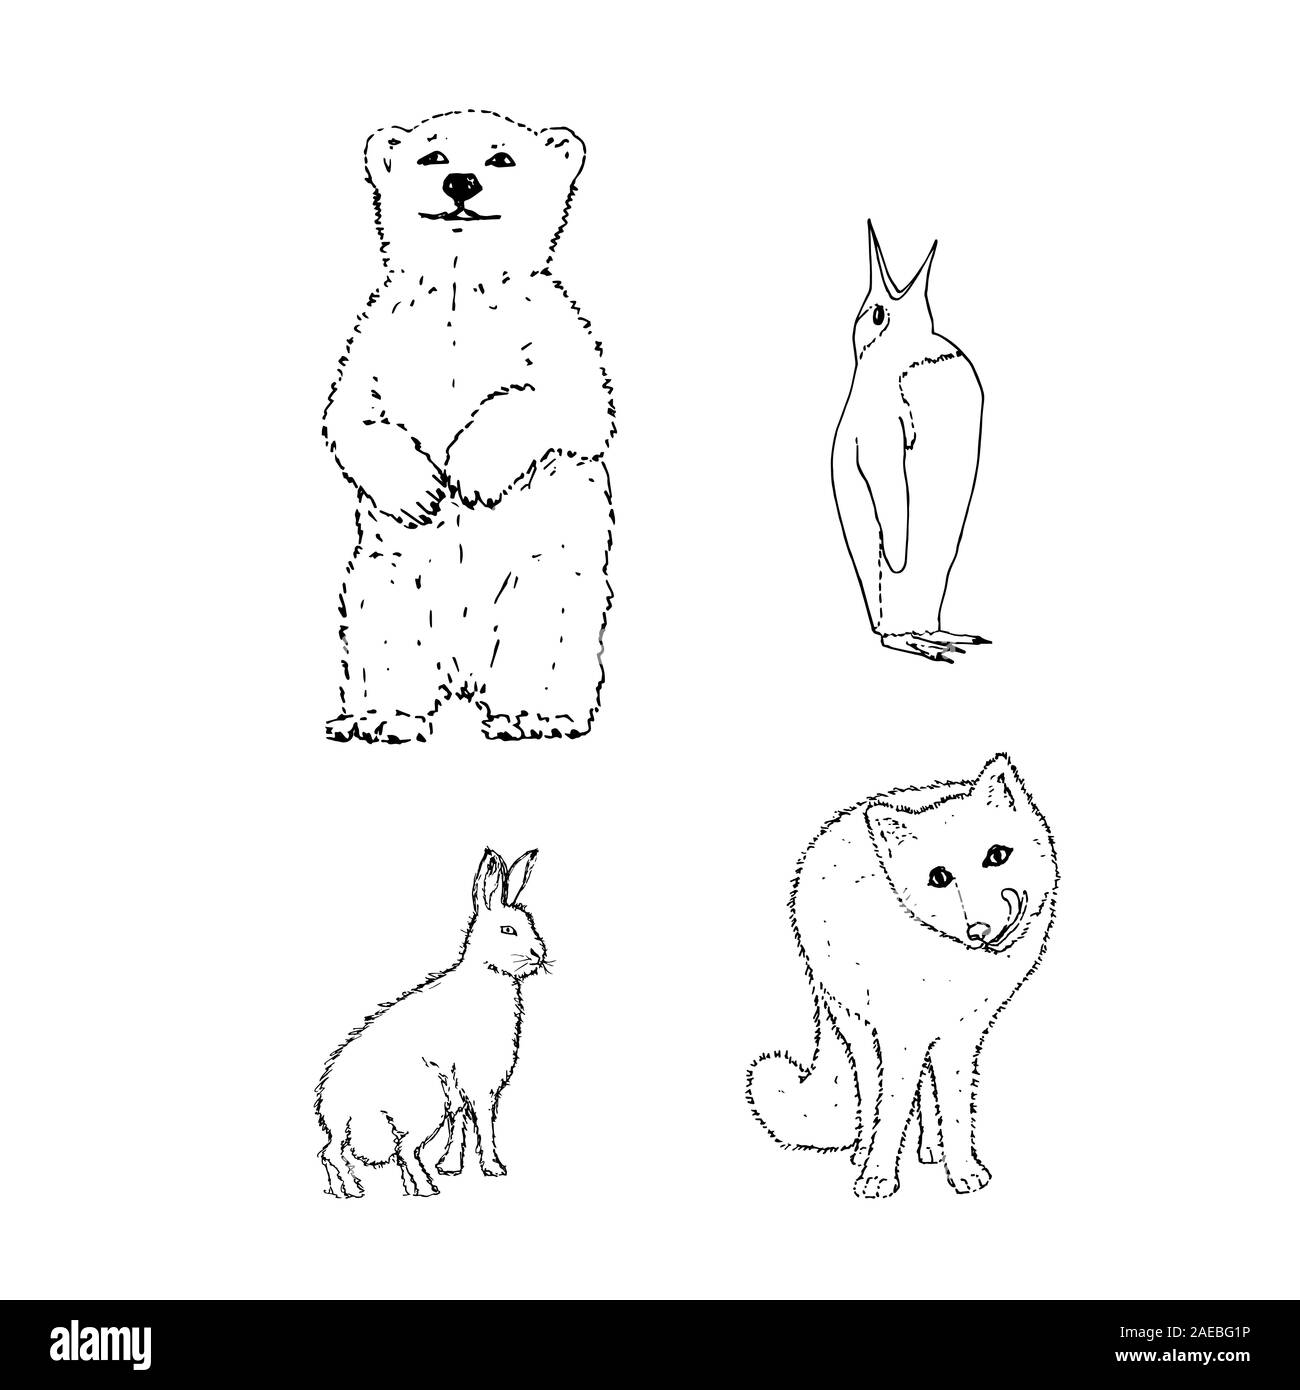 Set of northern winter animals: bear, penguin, rabbit, fox. Black outline on white background. Picture can be used in greeting cards, posters, flyers, banners, logo, further design etc. Vector illustration. EPS10 Stock Vector